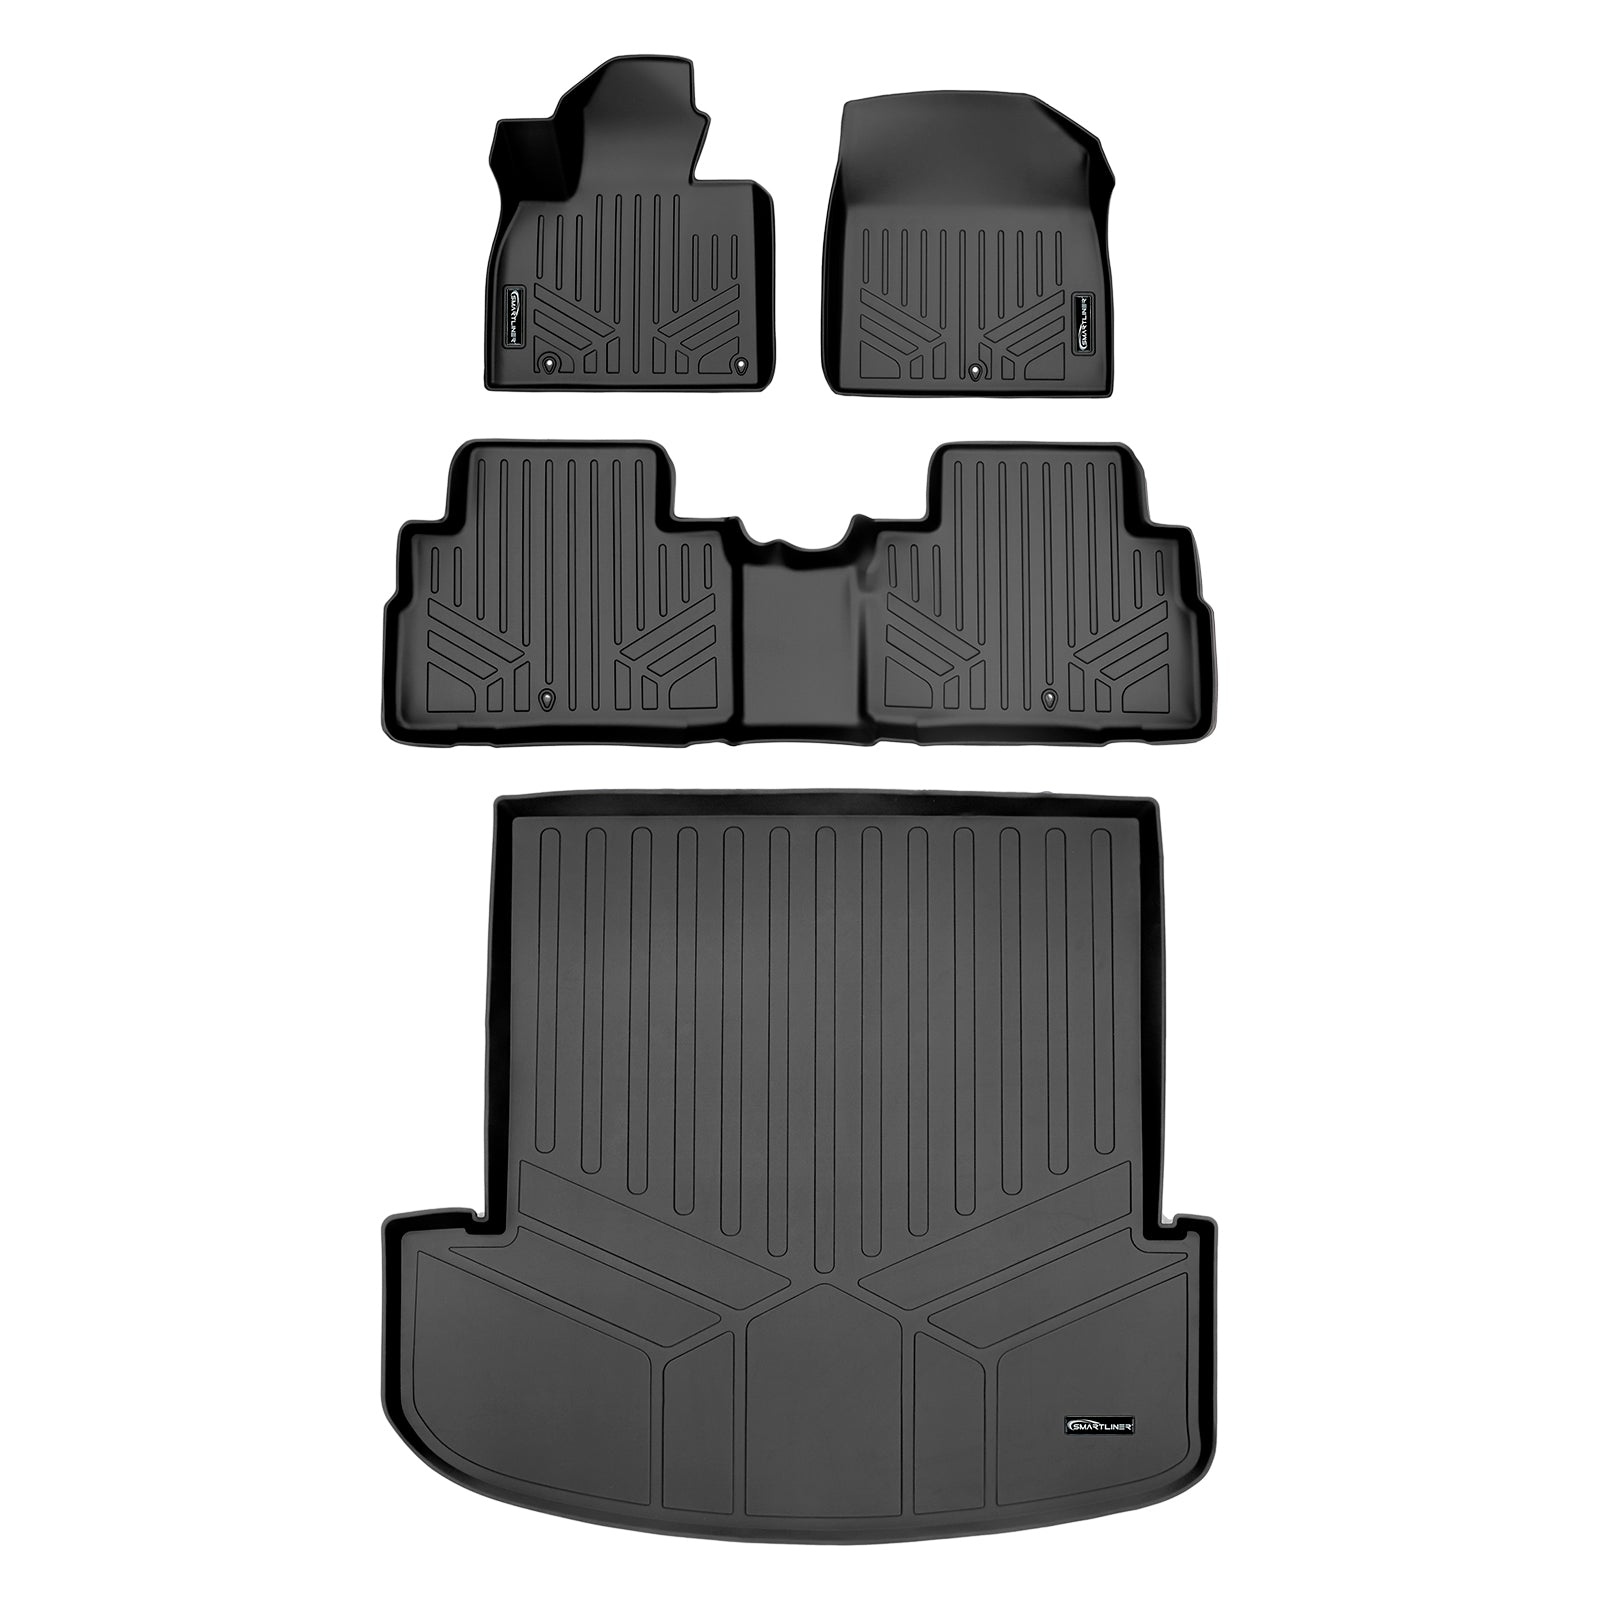 SMARTLINER Custom Fit for 2020 Kia Telluride with 2nd Row Bench Seat - Smartliner USA